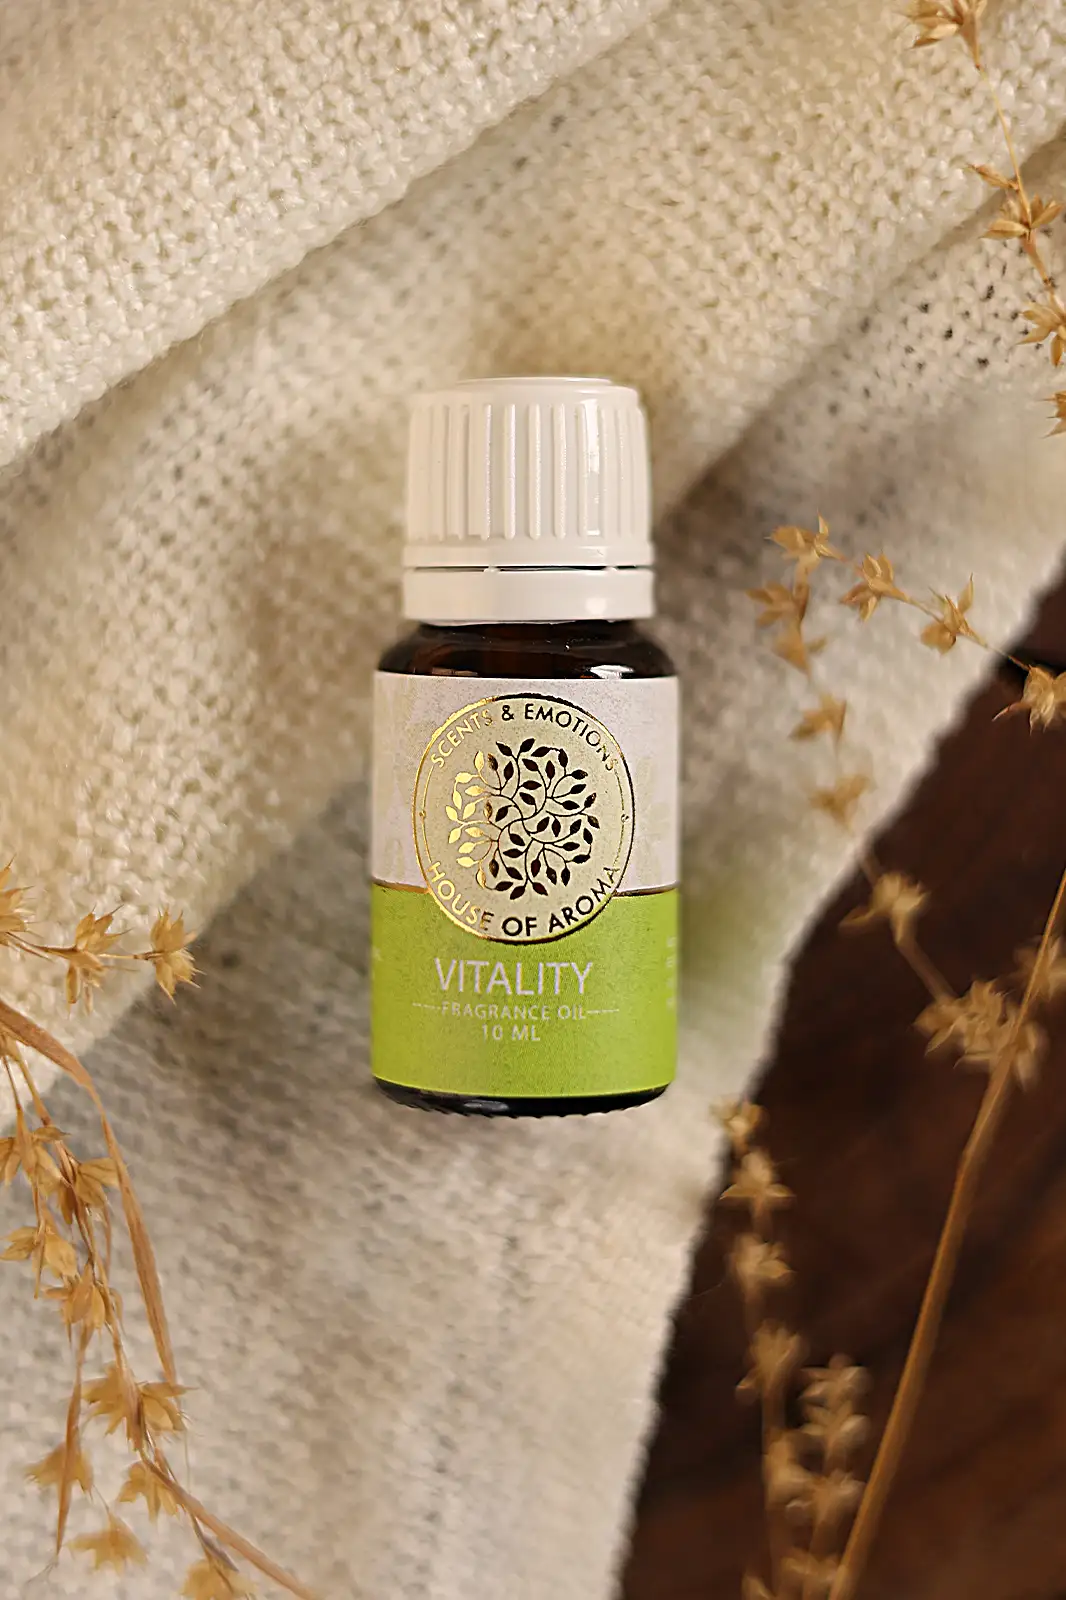 Fragrance Oil, Aroma oil, Synthetic oils, Fragrance oil for candles, oil for diffusers, Aromatic oil, Candle oil, Aromatherapy oil, oil manufacturers, House of Aroma, vitality fragrance oil, Vitality vanilla fragrance benefits, vitality frankincense oil, vitality oil, vitality aroma oil, vitality oil uses, vitality oil benefits, fragrance oil for perfume